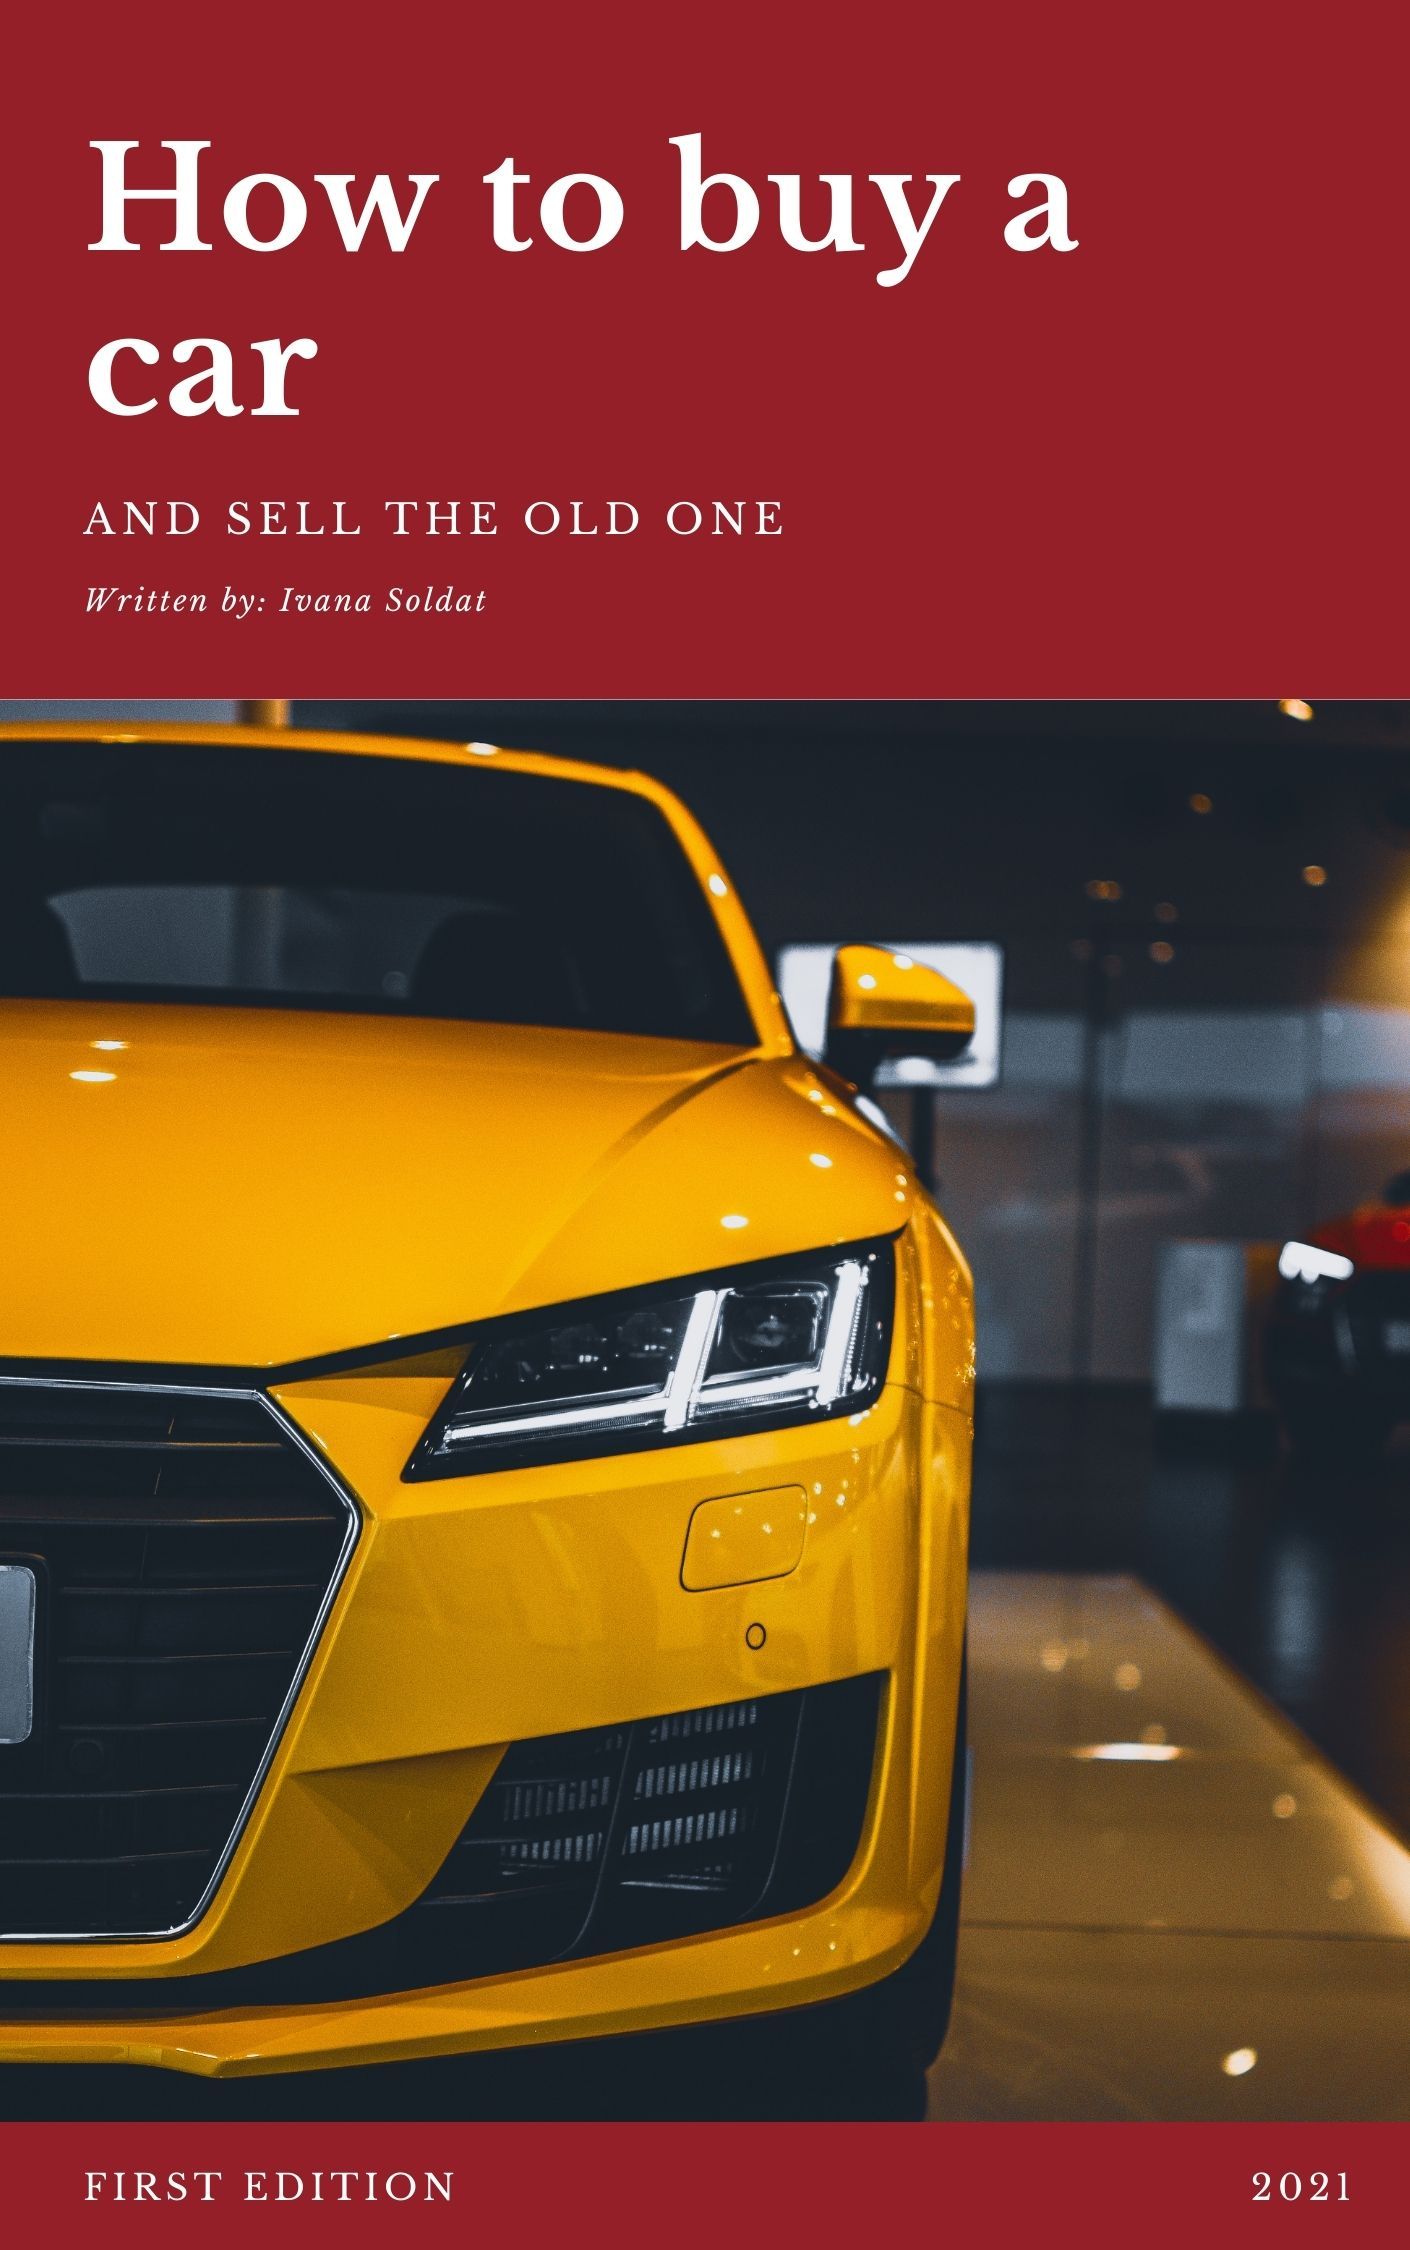 How to buy a car and sell the old one's Book Image